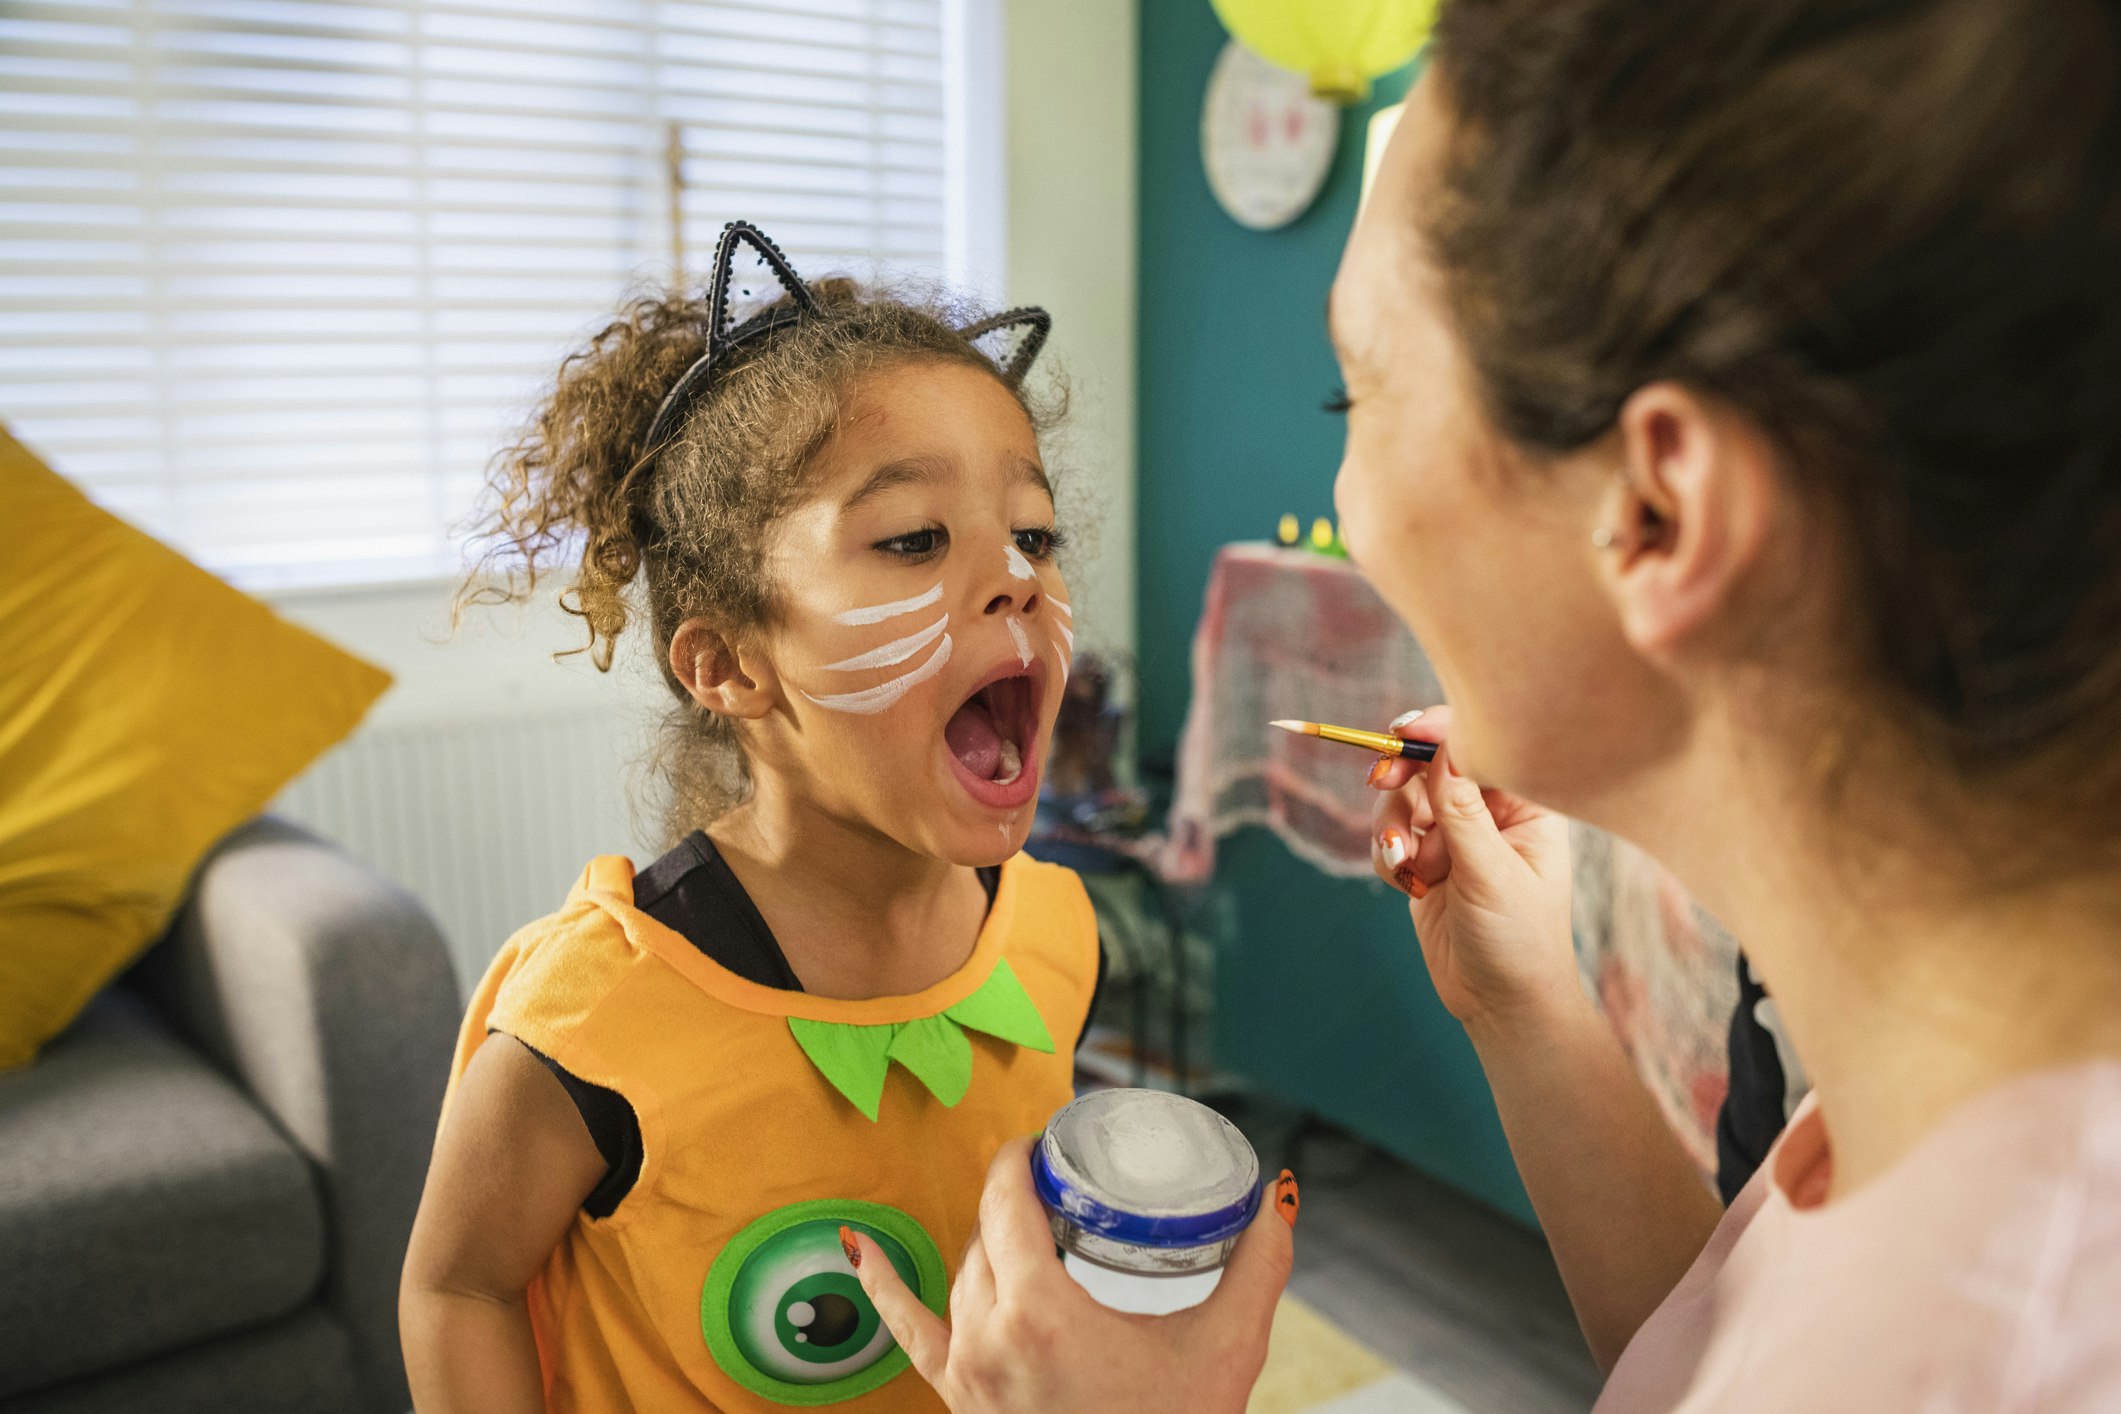 Easy face painting ideas for kids this Halloween - Mirror Online